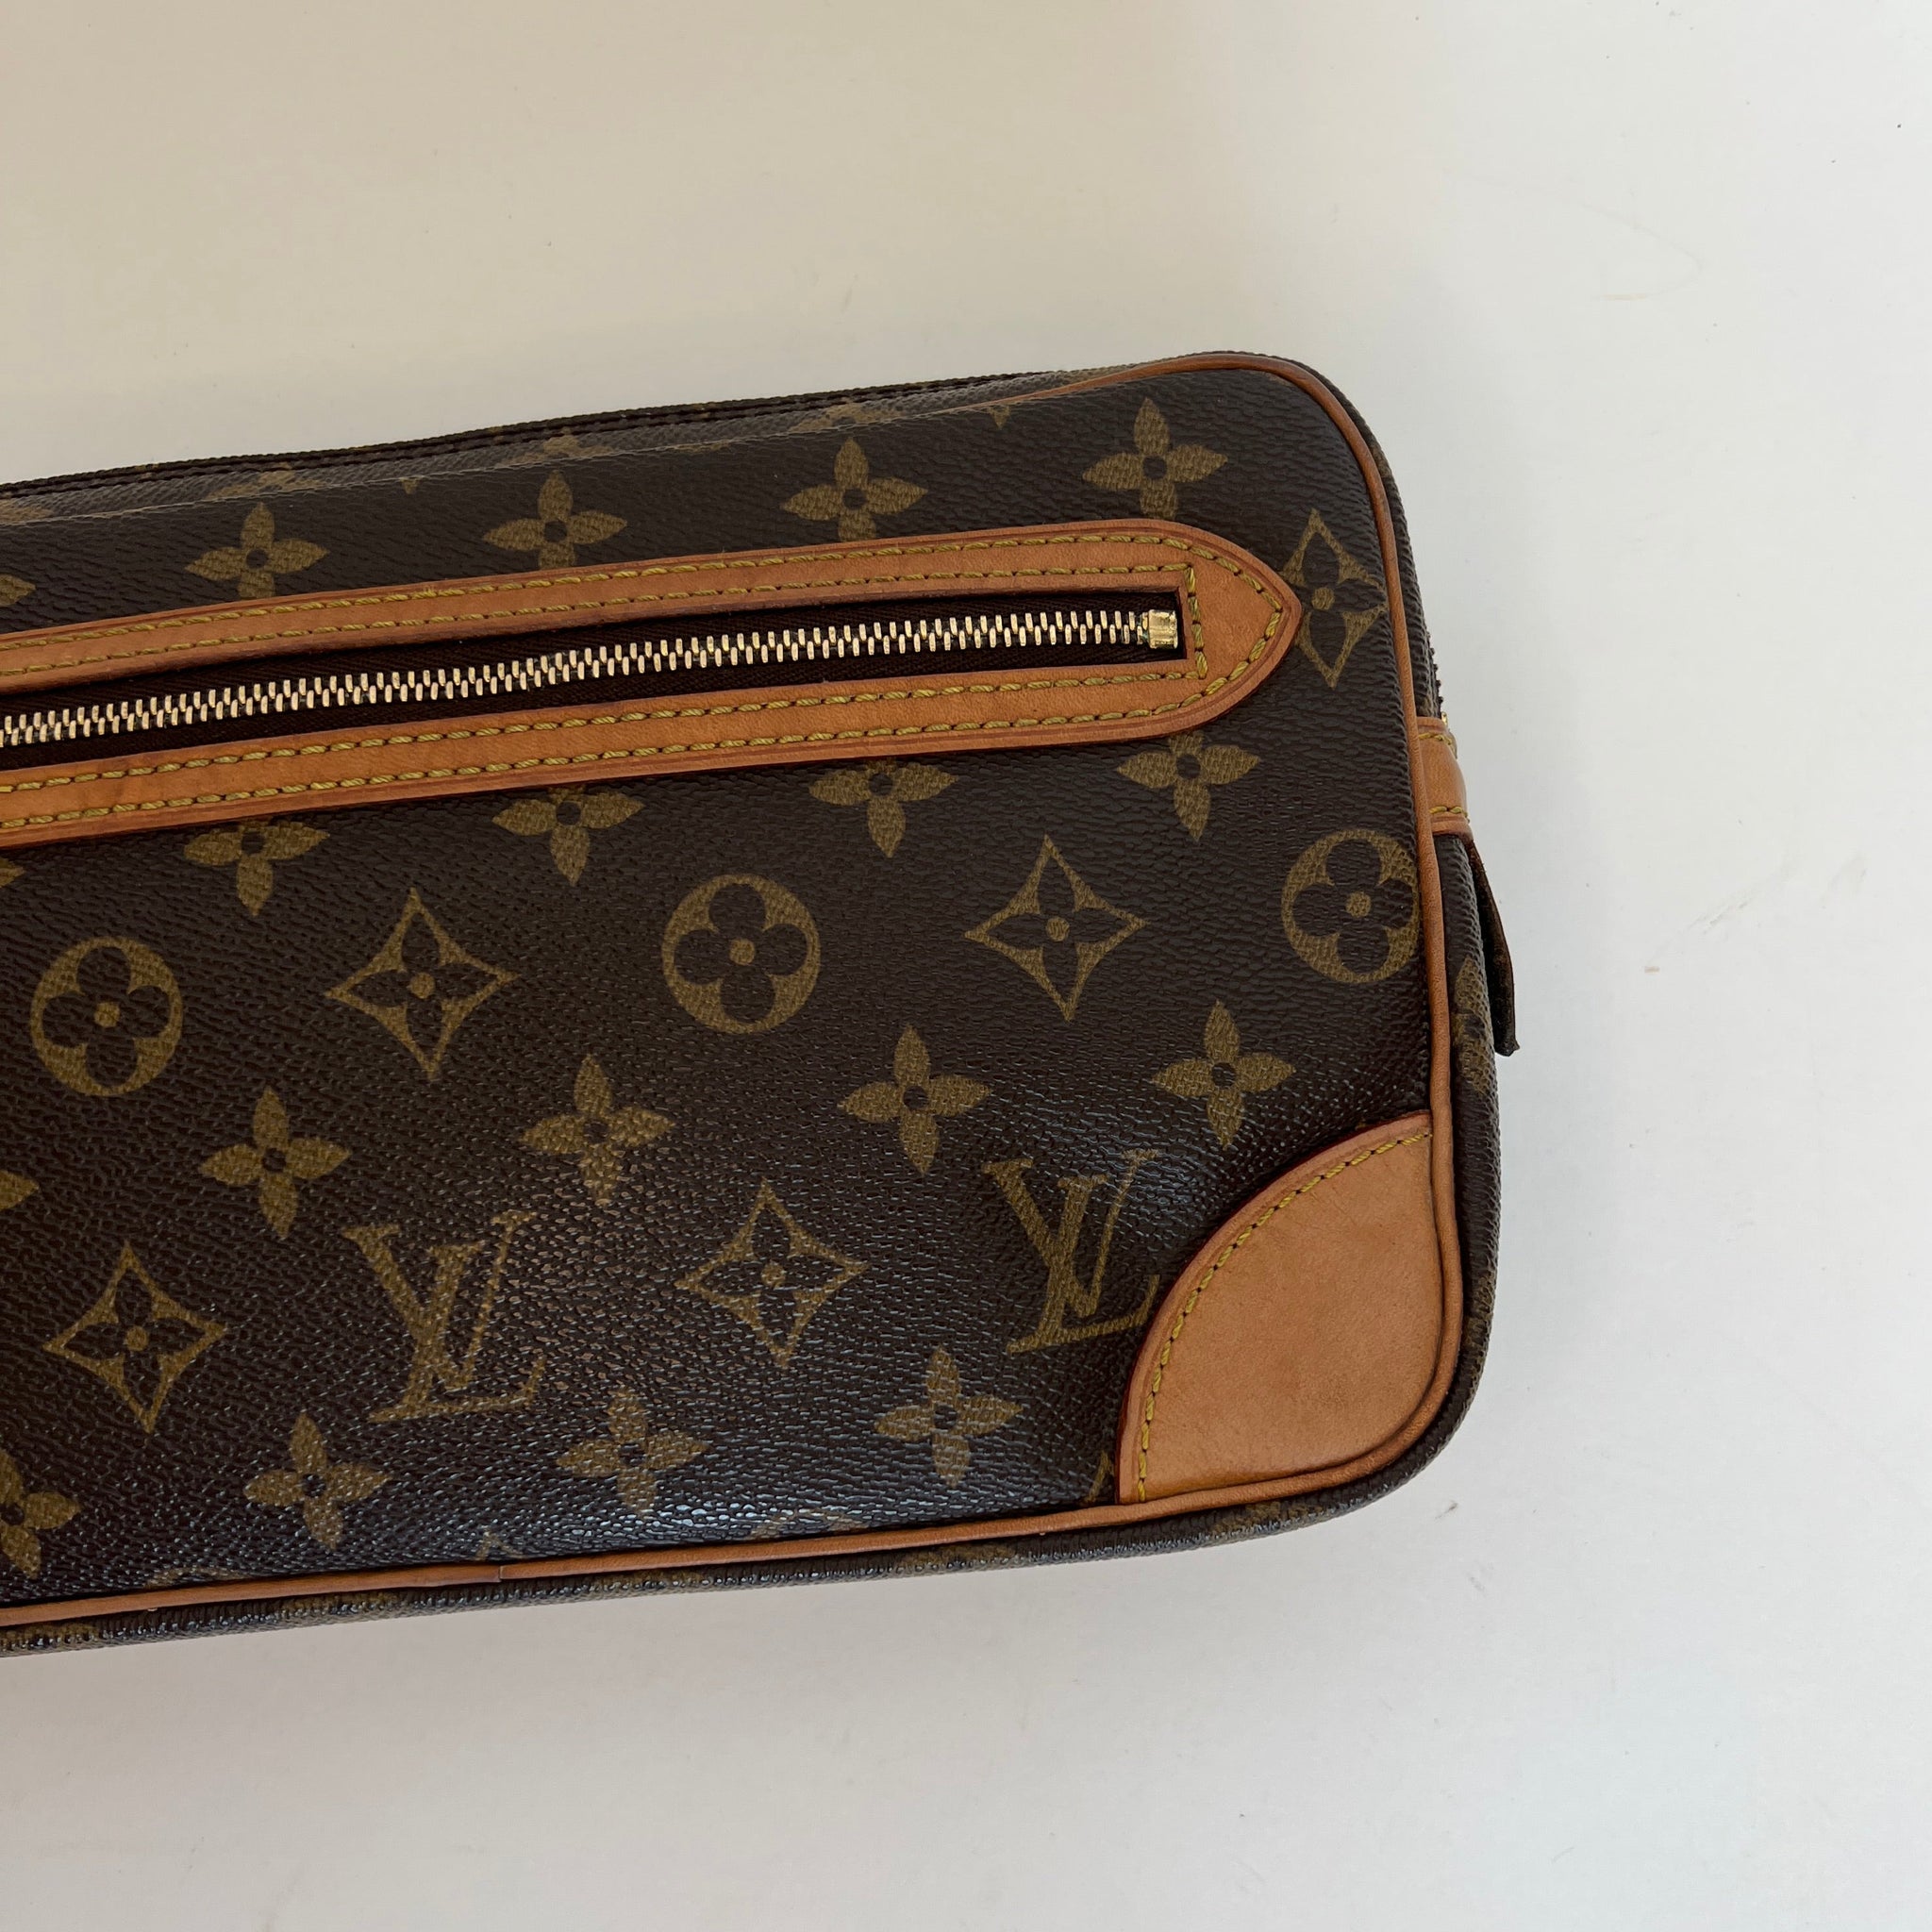 Louis Vuitton - Authenticated Marly Dragonne Clutch Bag - Leather Brown for Women, Good Condition